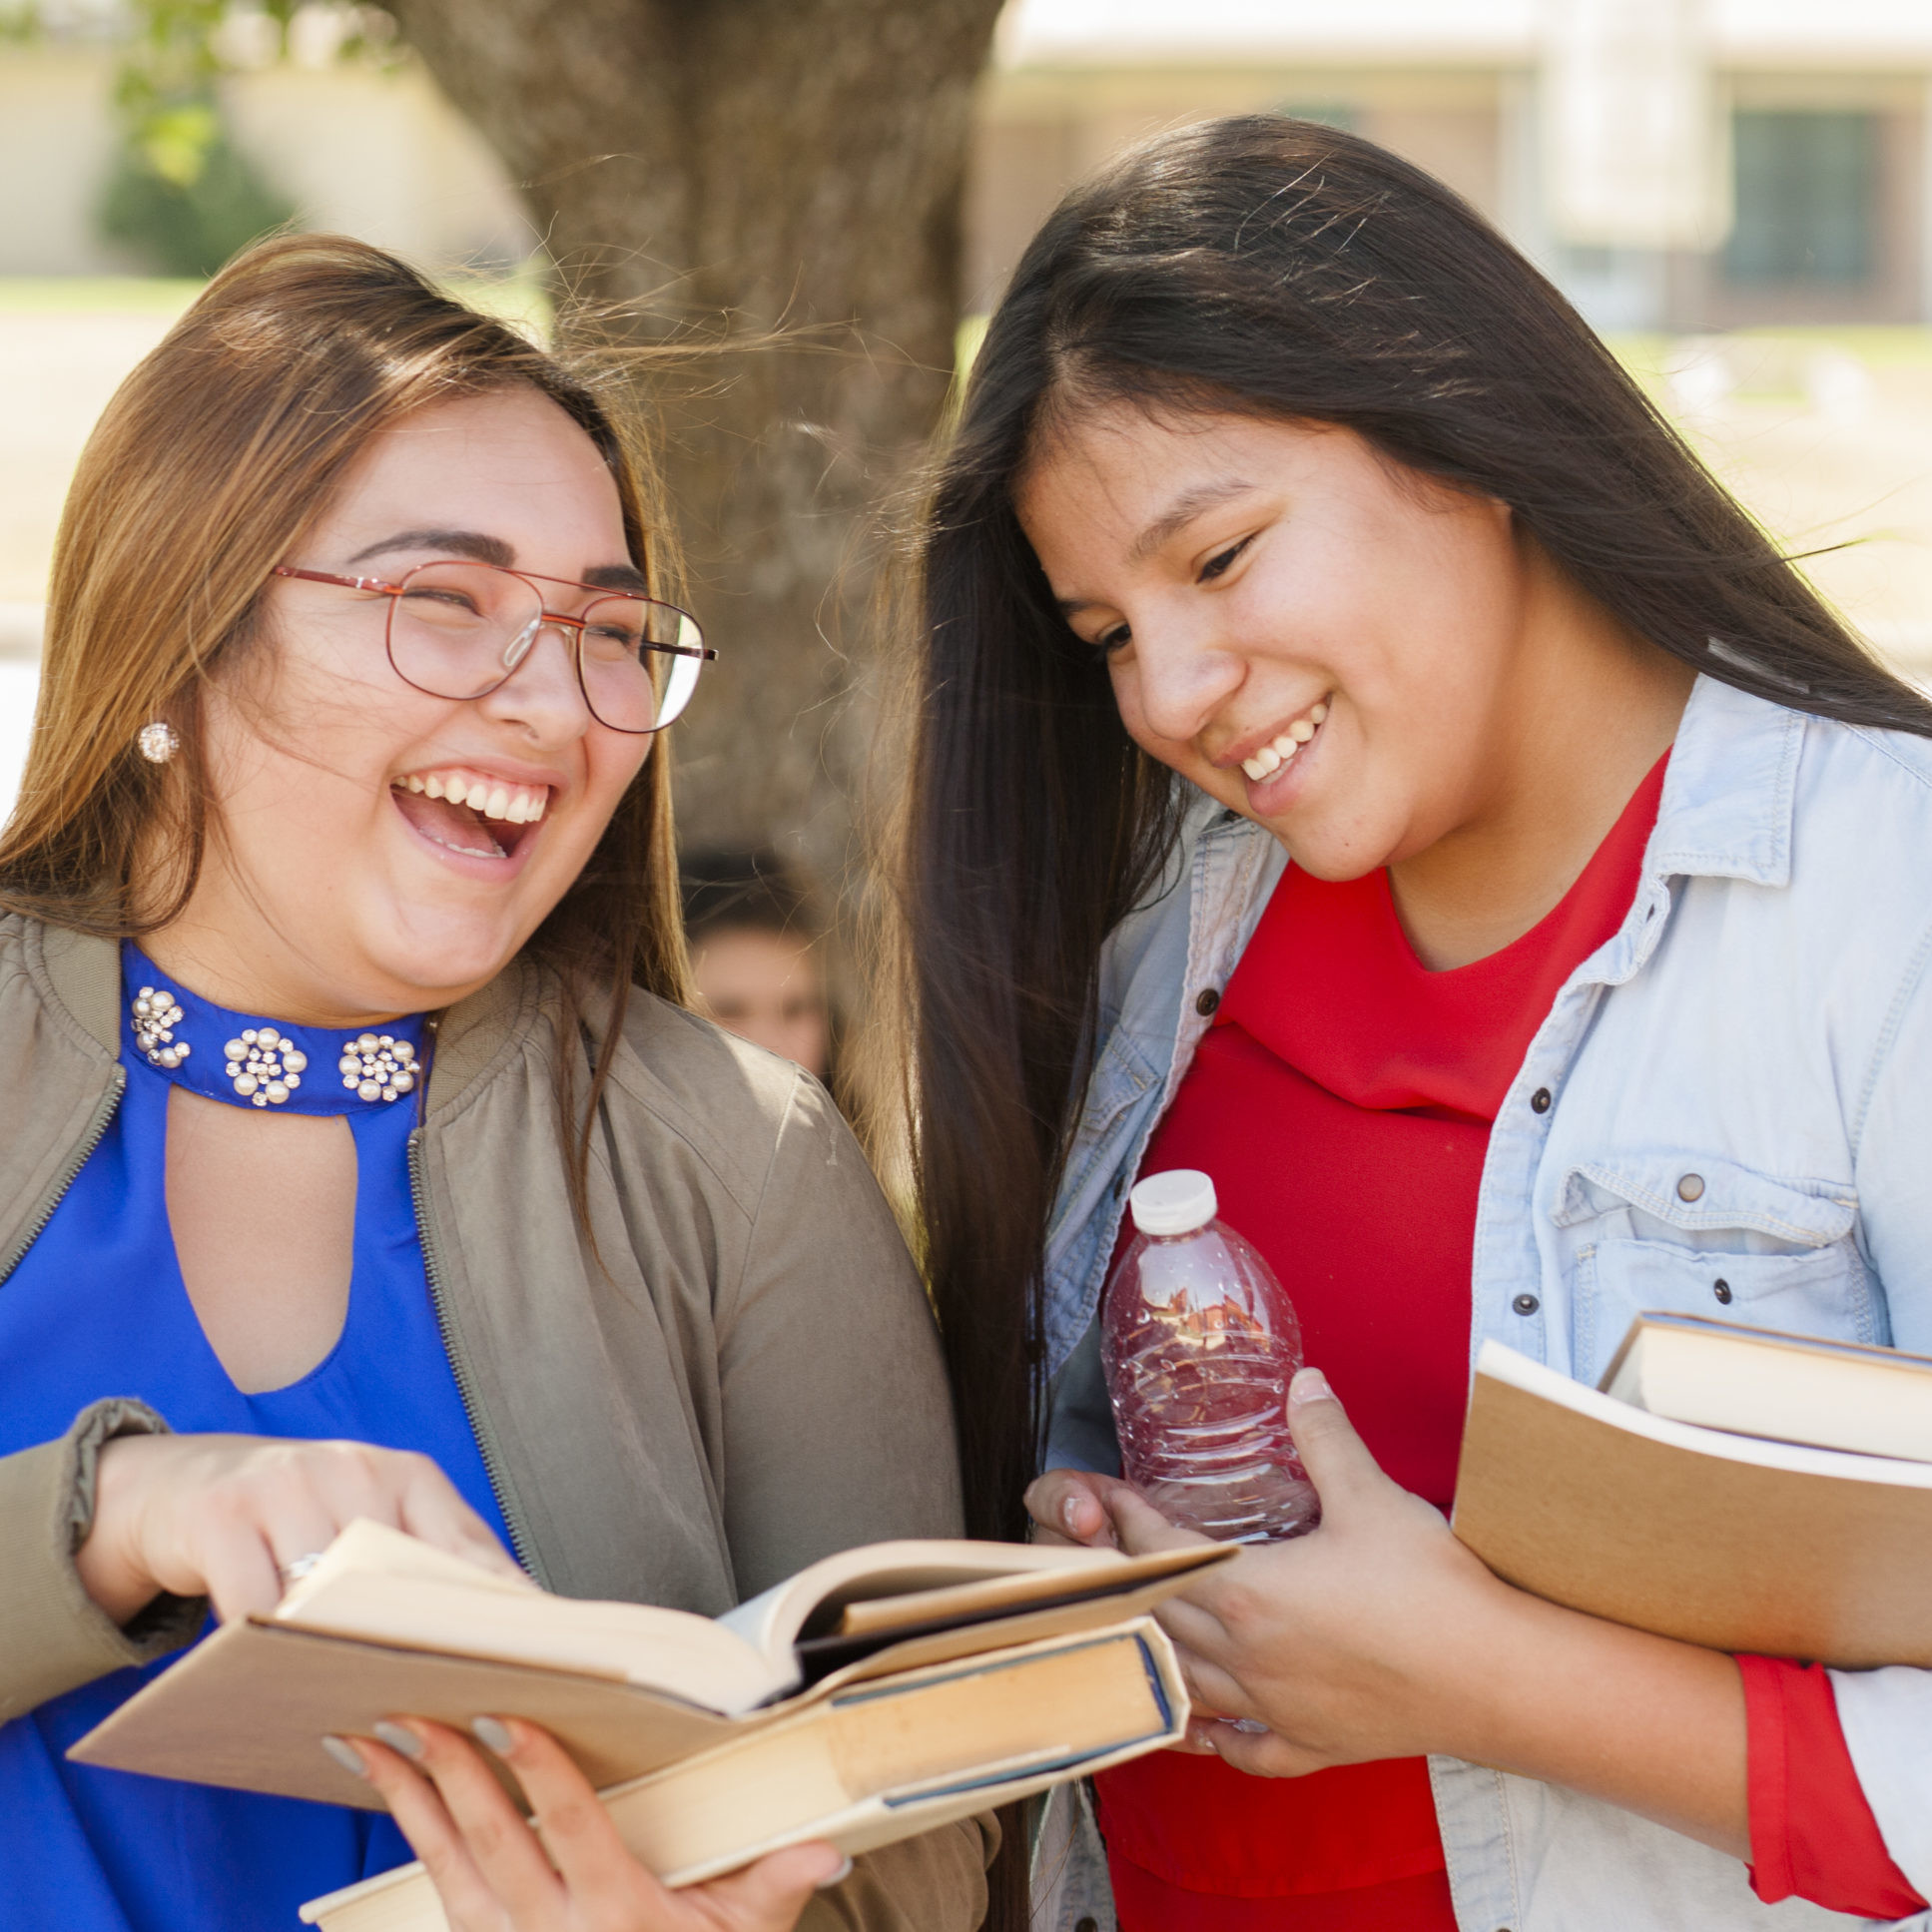 Two young teen girls stand together outside of school building laughing